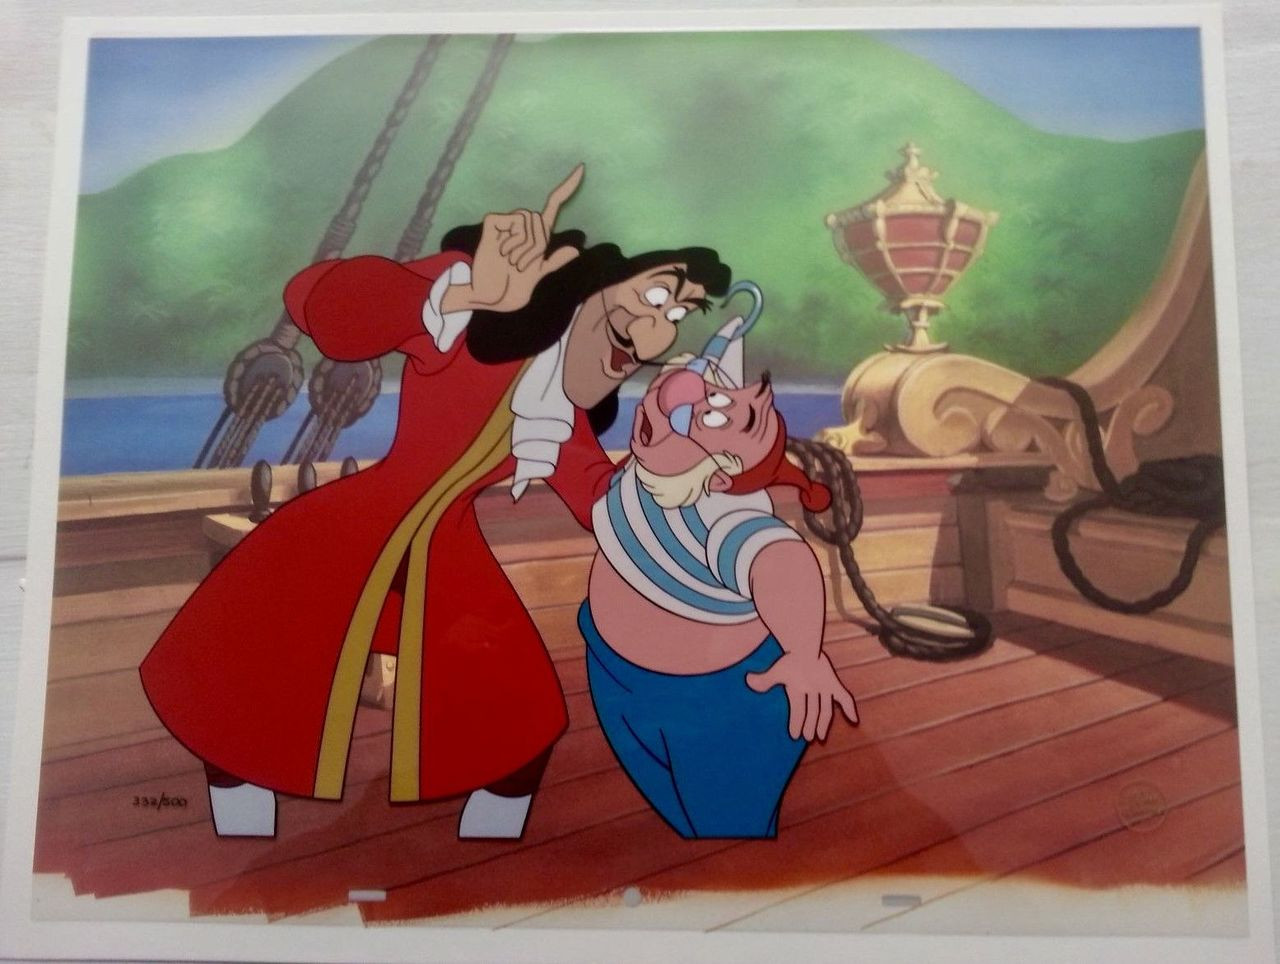 Peter Pan & Captain Hook - Good And Evil - Disney Traditions